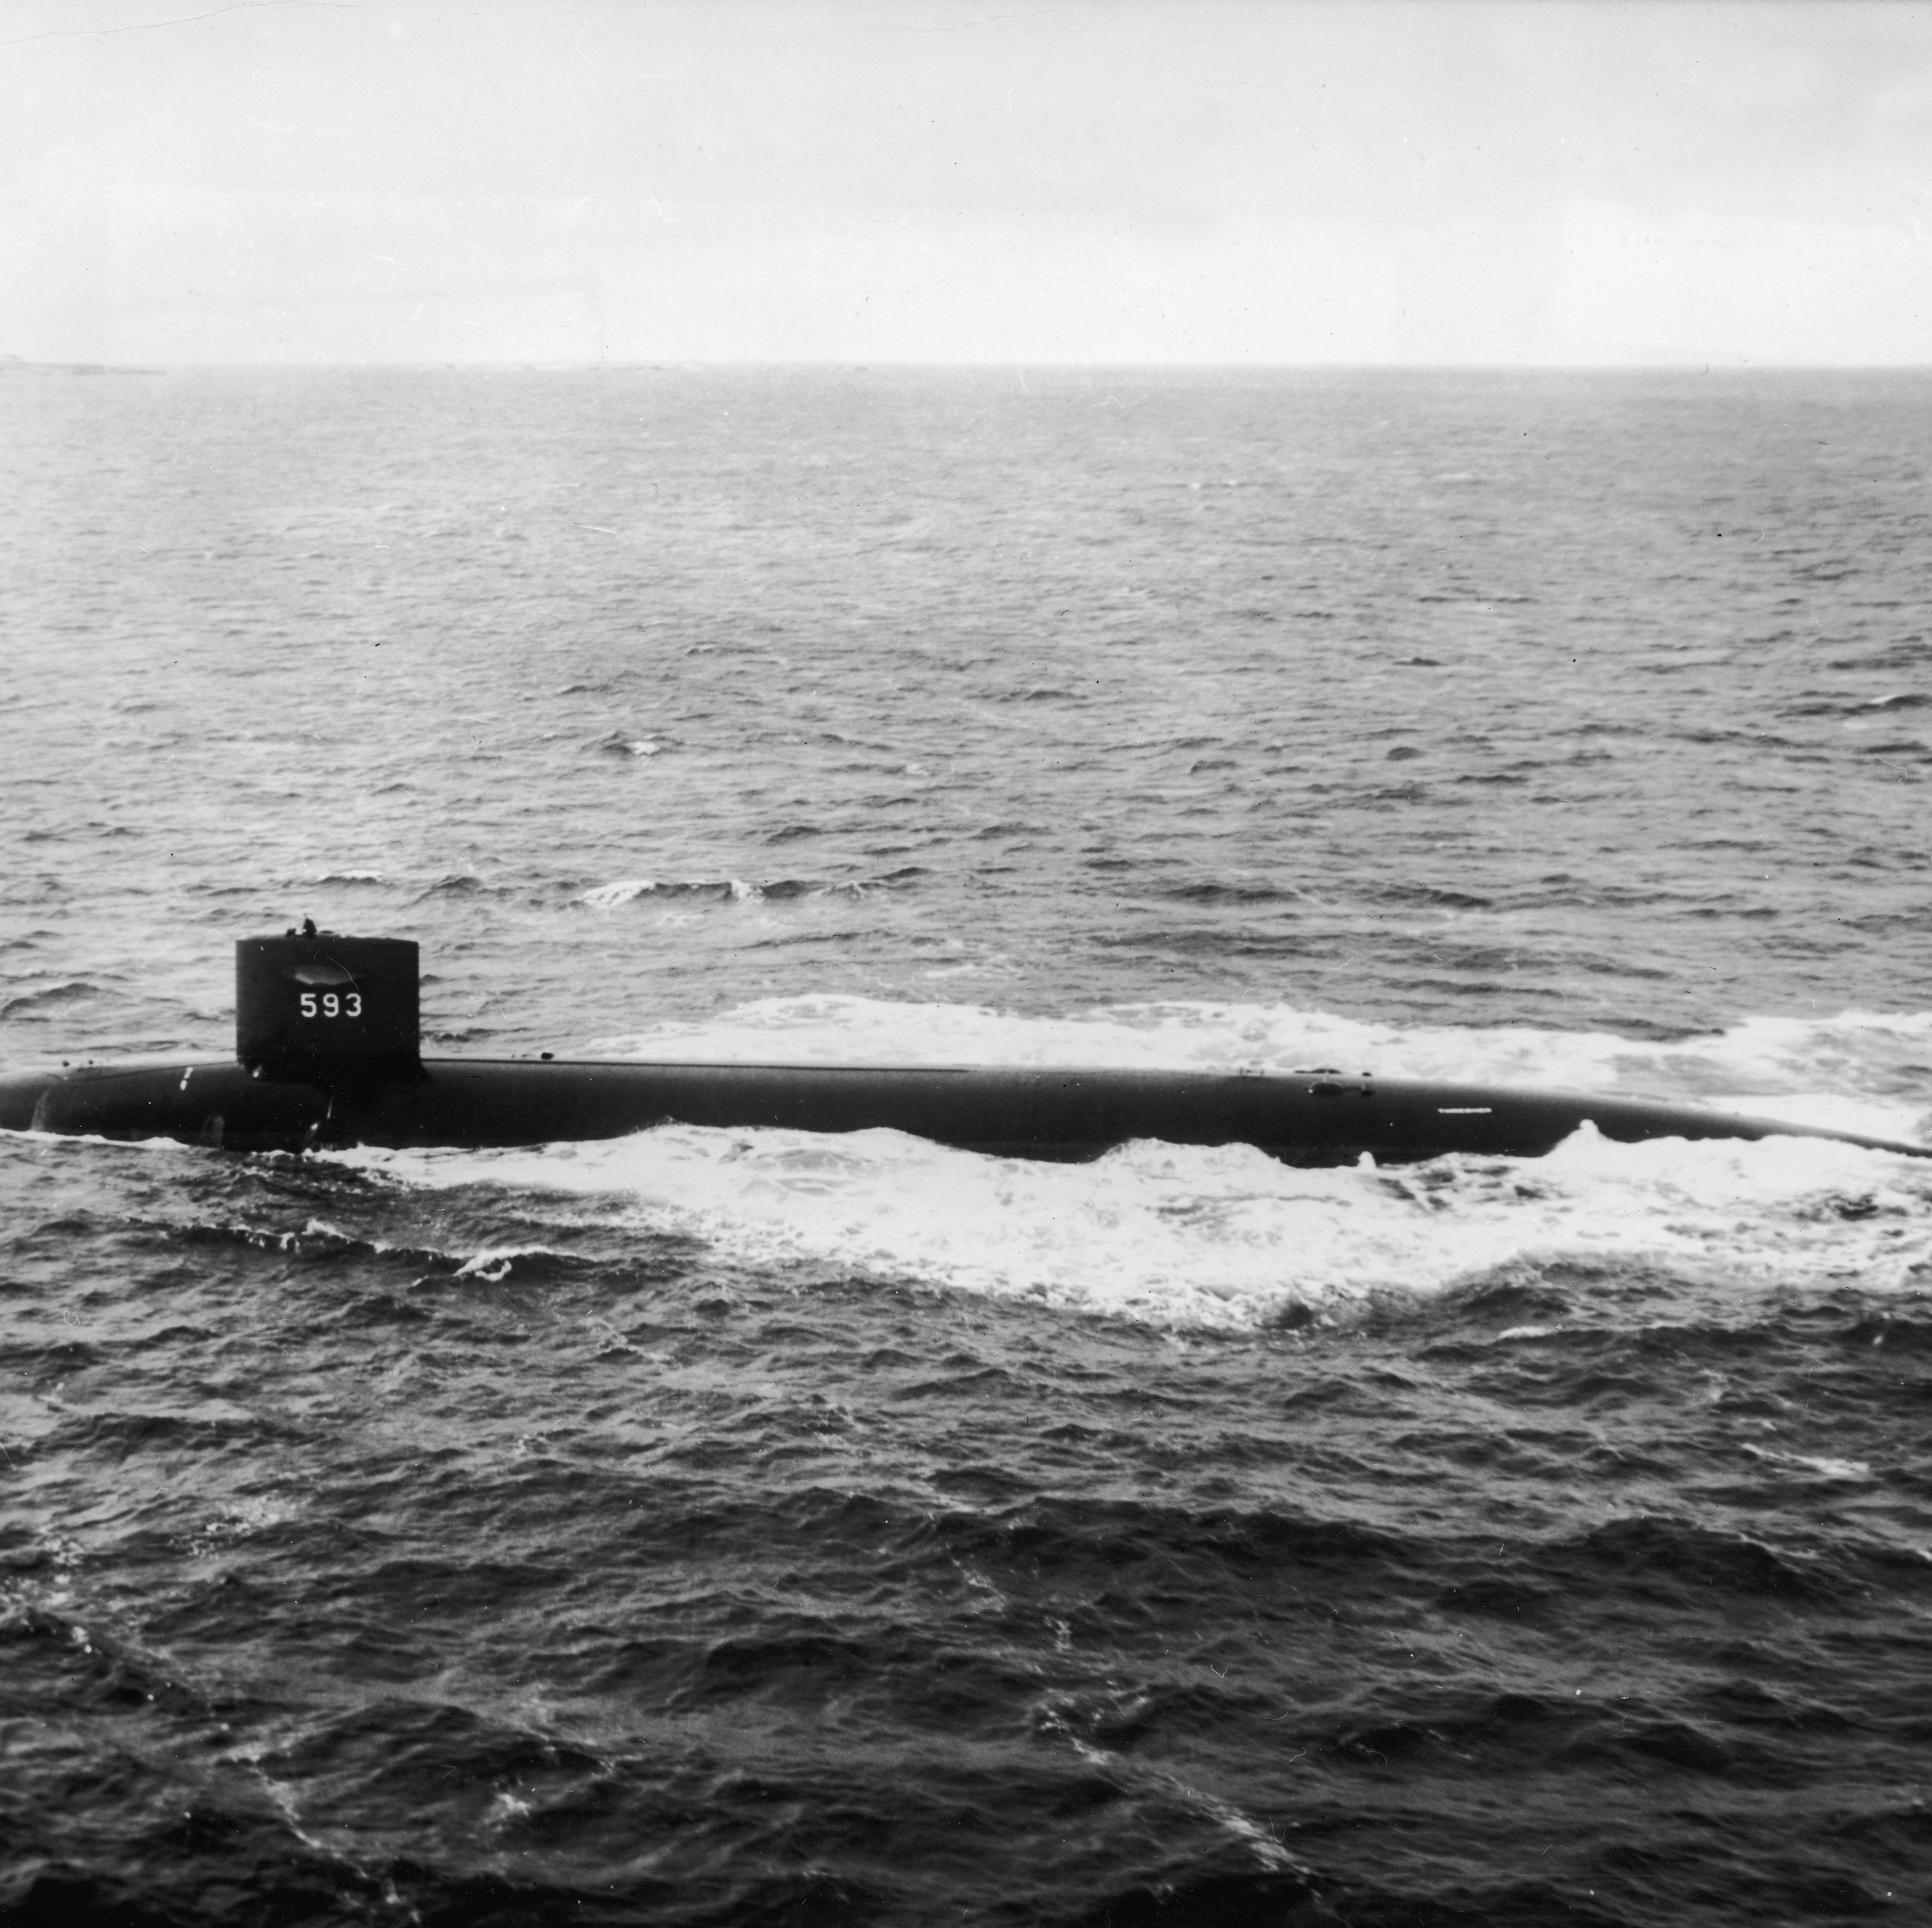 New Declassified Documents Reveal the Truth About Why the USS Thresher Sank